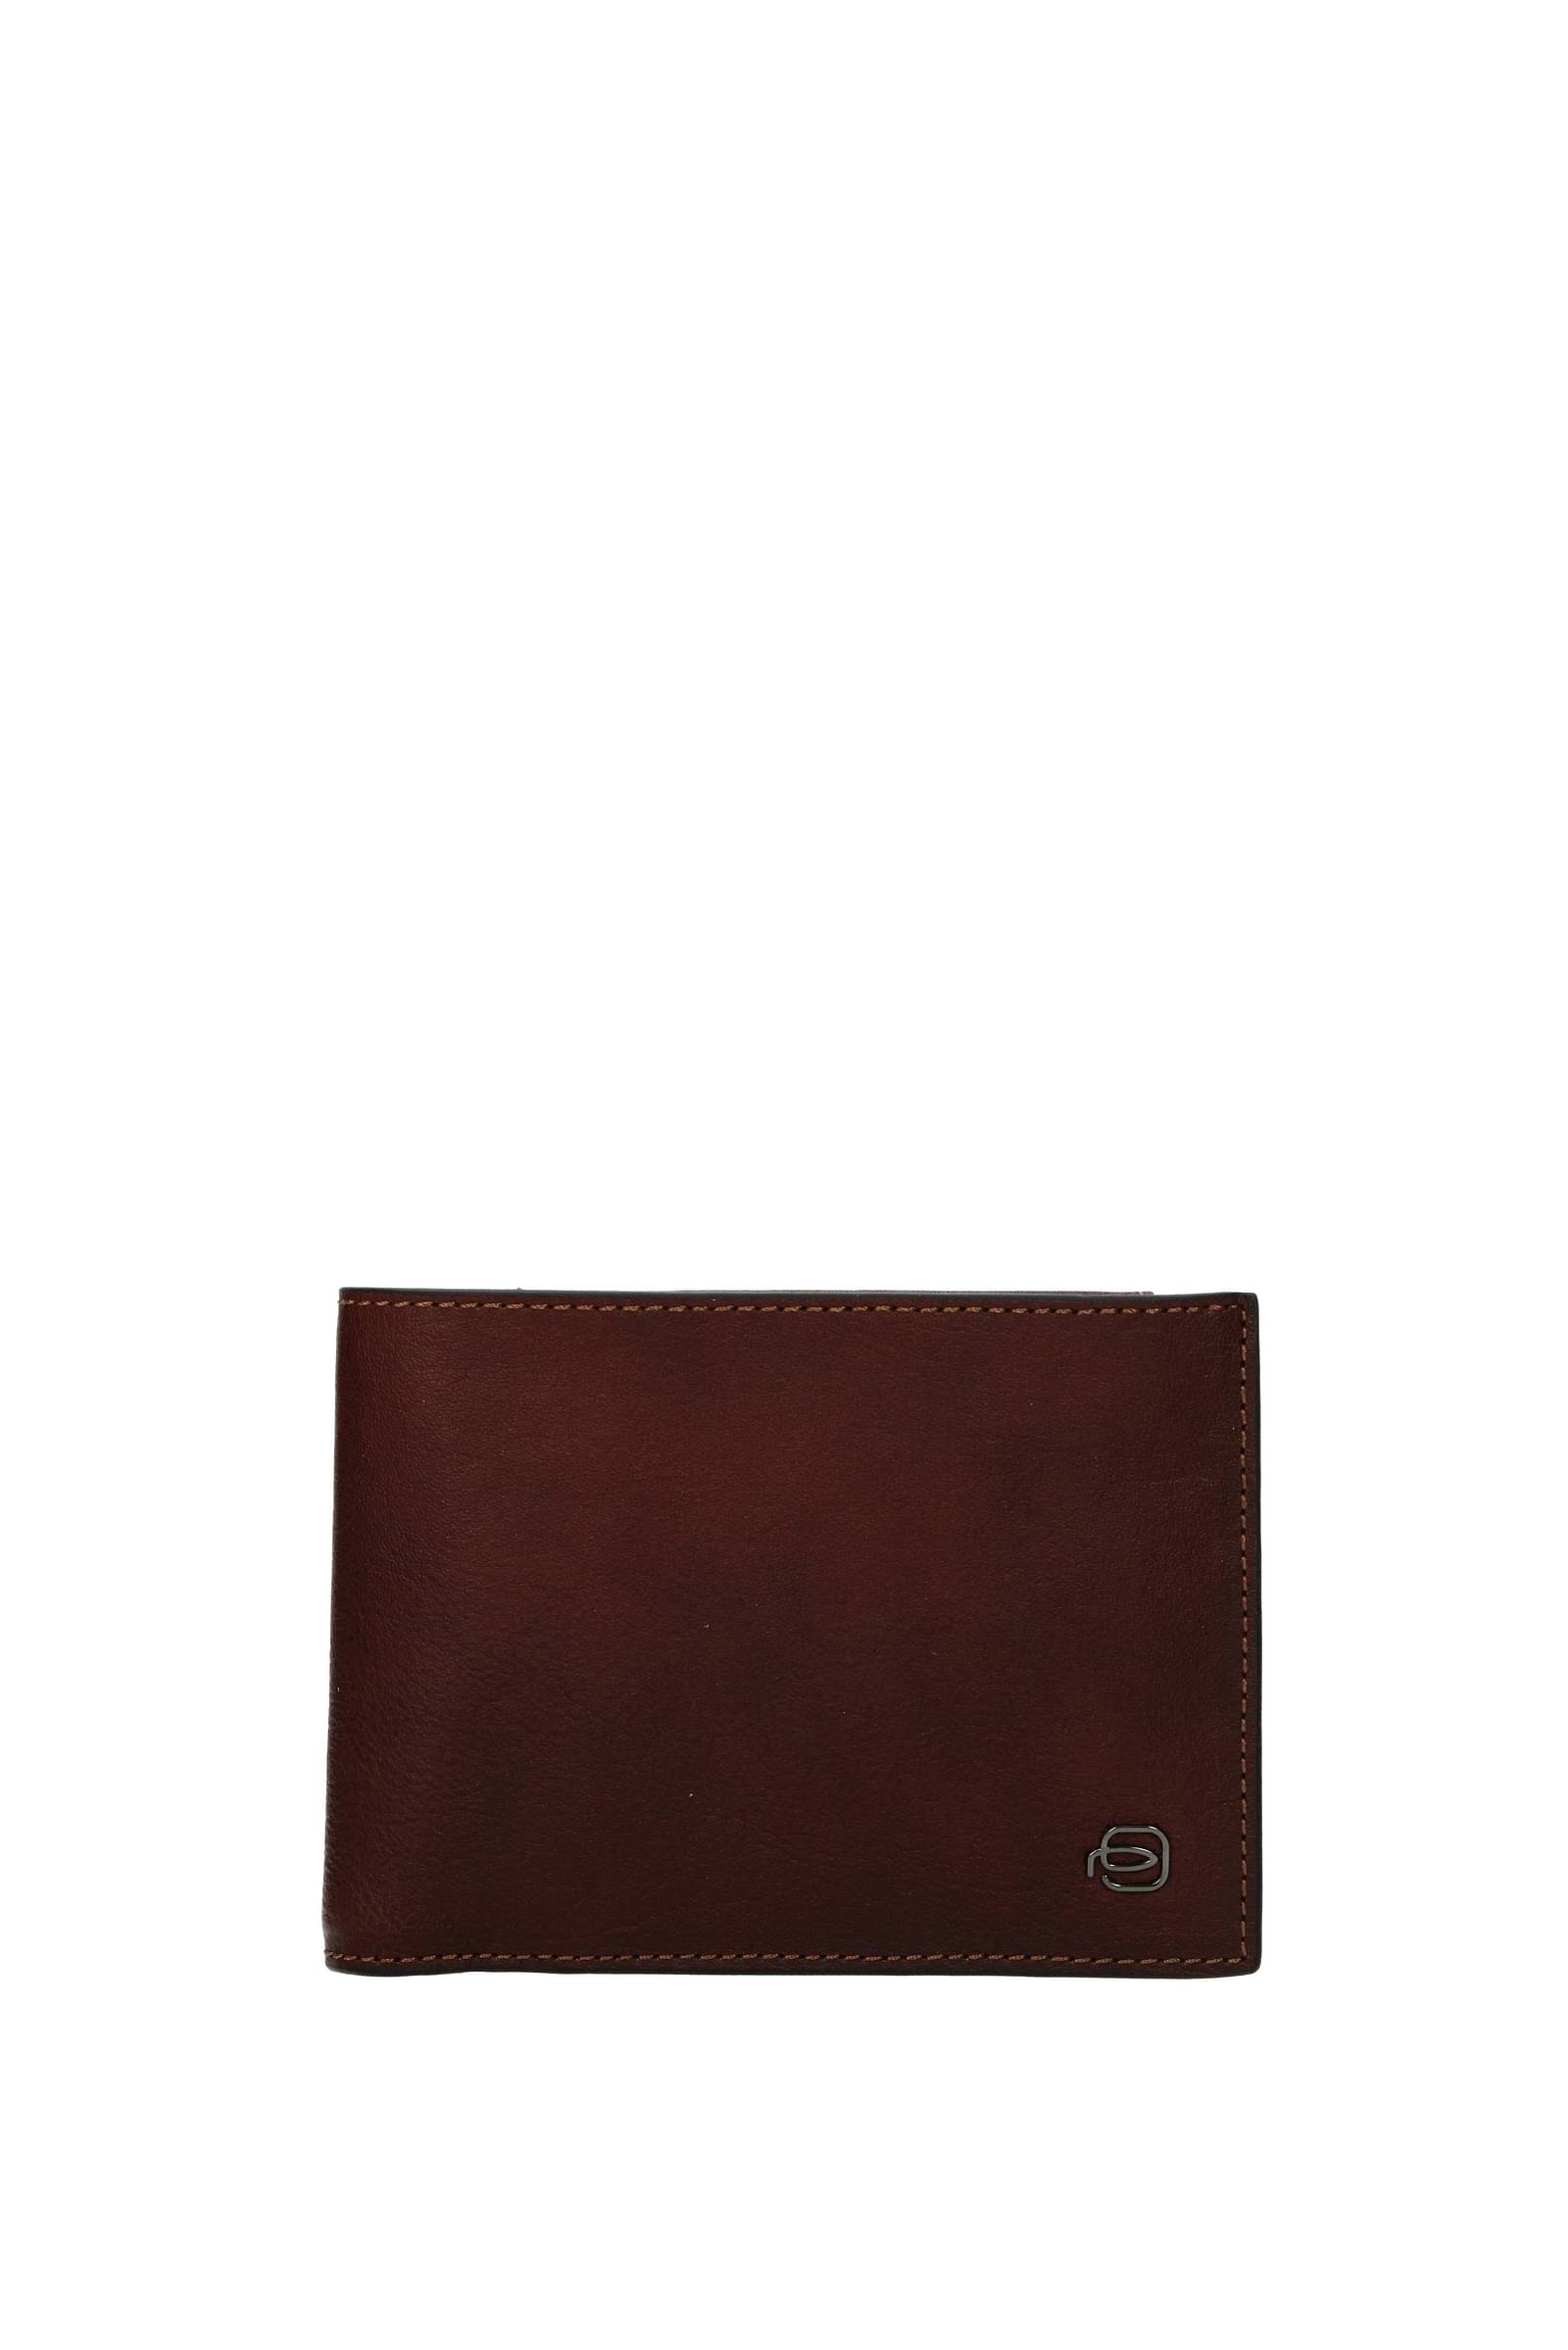 Piquadro Wallets Men PU257B3CU Leather Brown Leather 66€